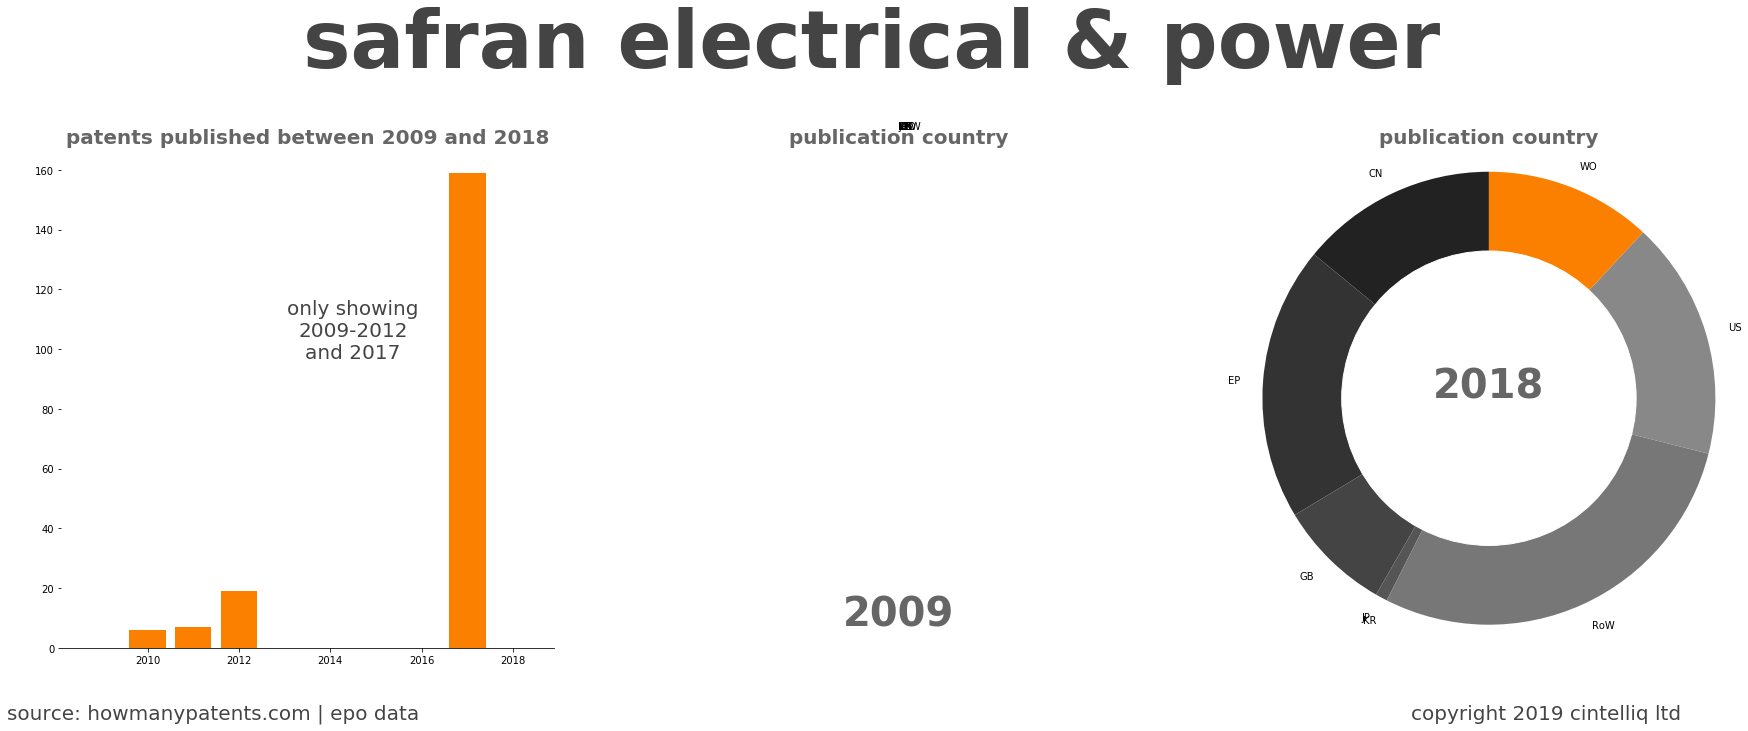 summary of patents for Safran Electrical & Power